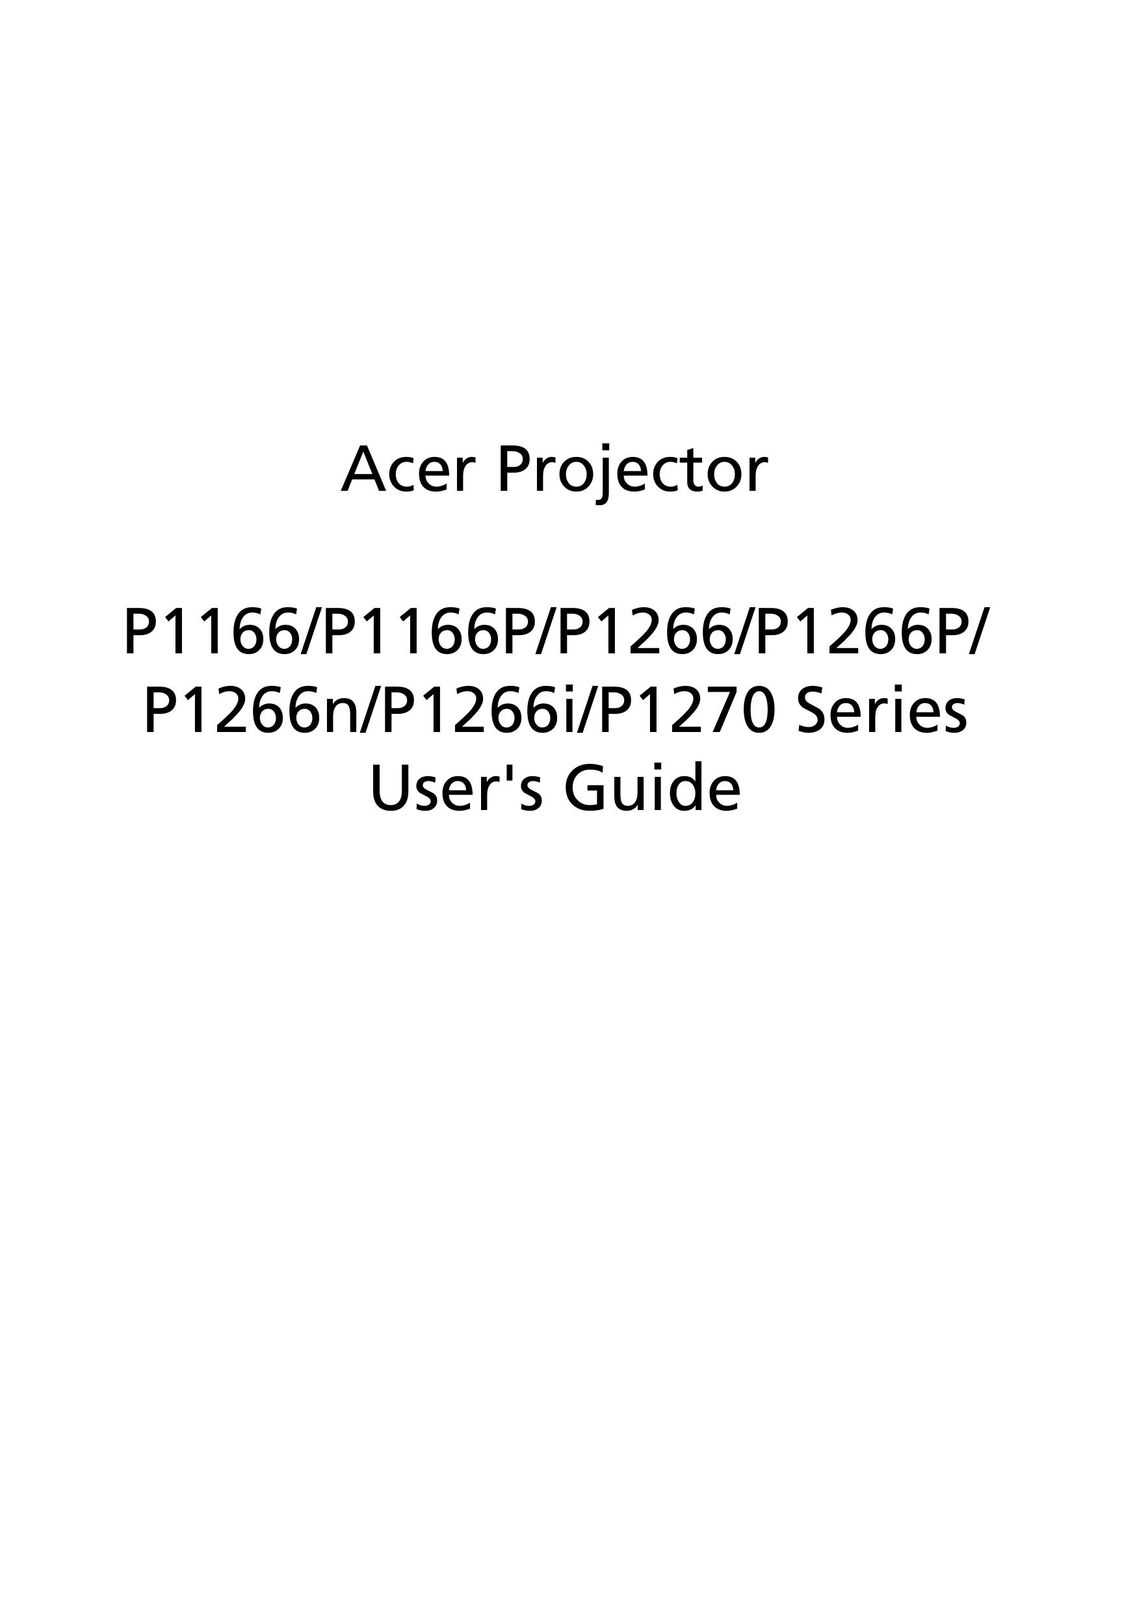 Acer P1266P Projector User Manual